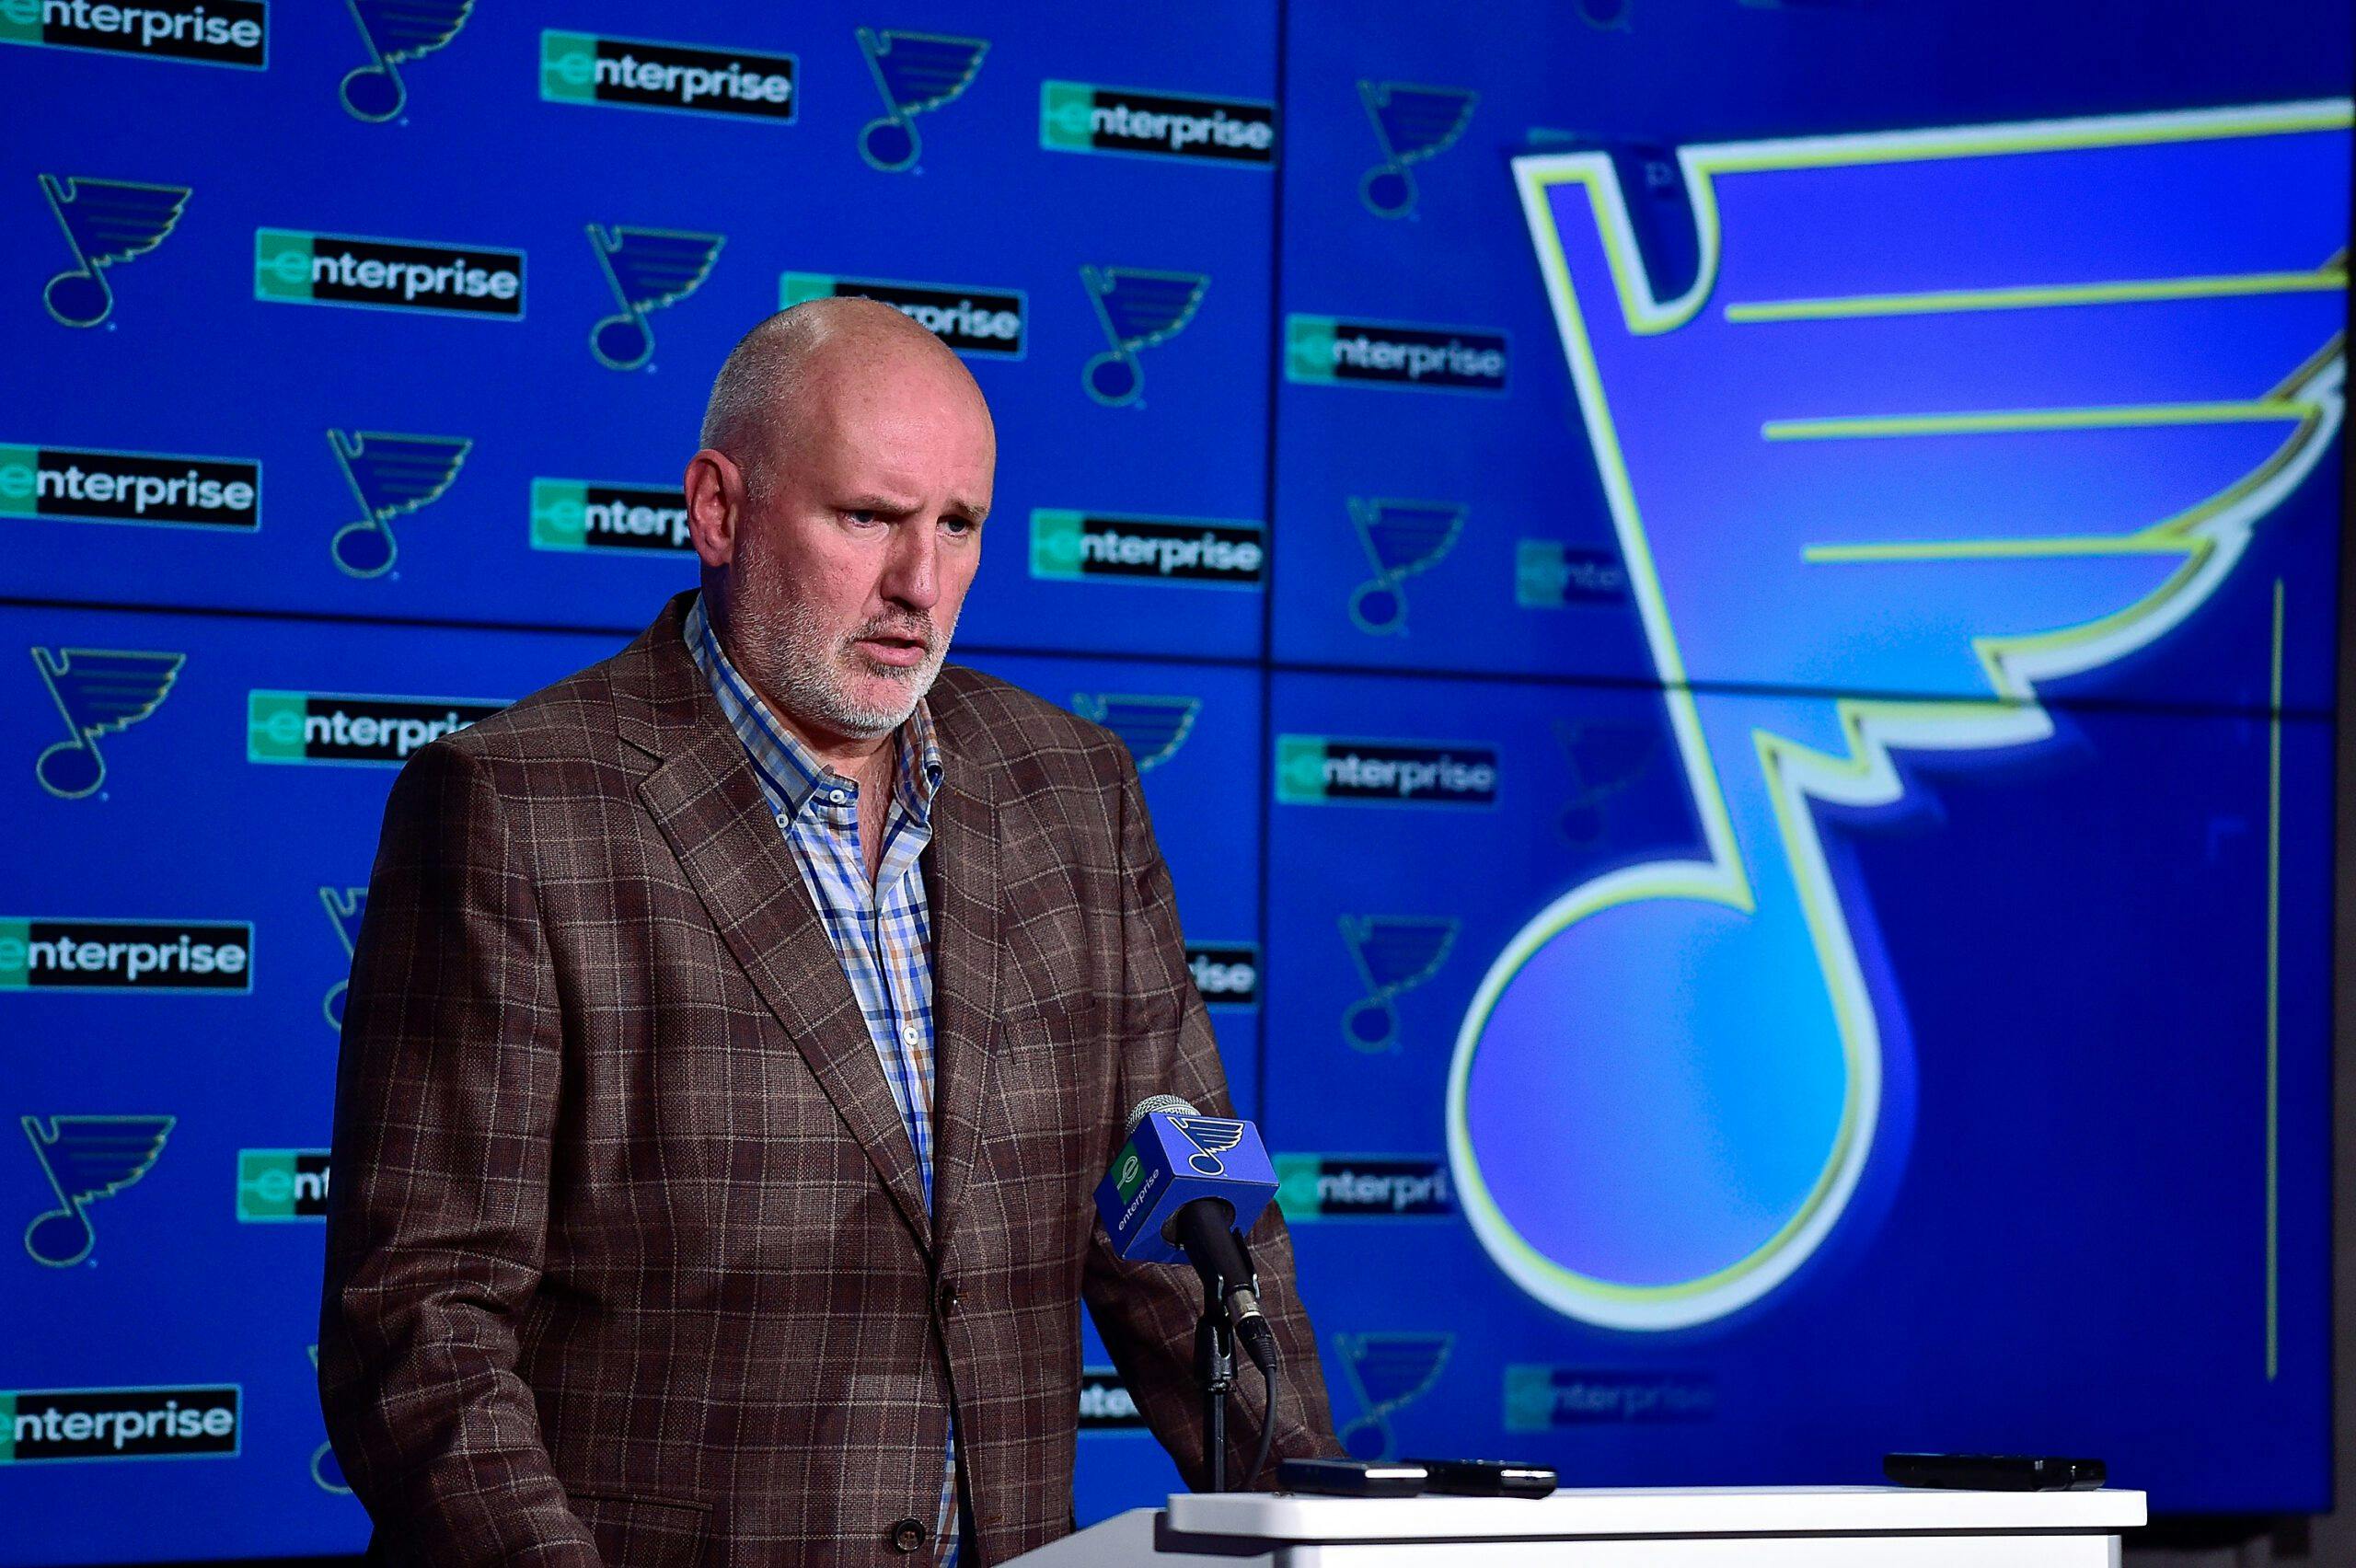 Frankly Speaking: St. Louis Blues GM Doug Armstrong on the Blues rebuild plans